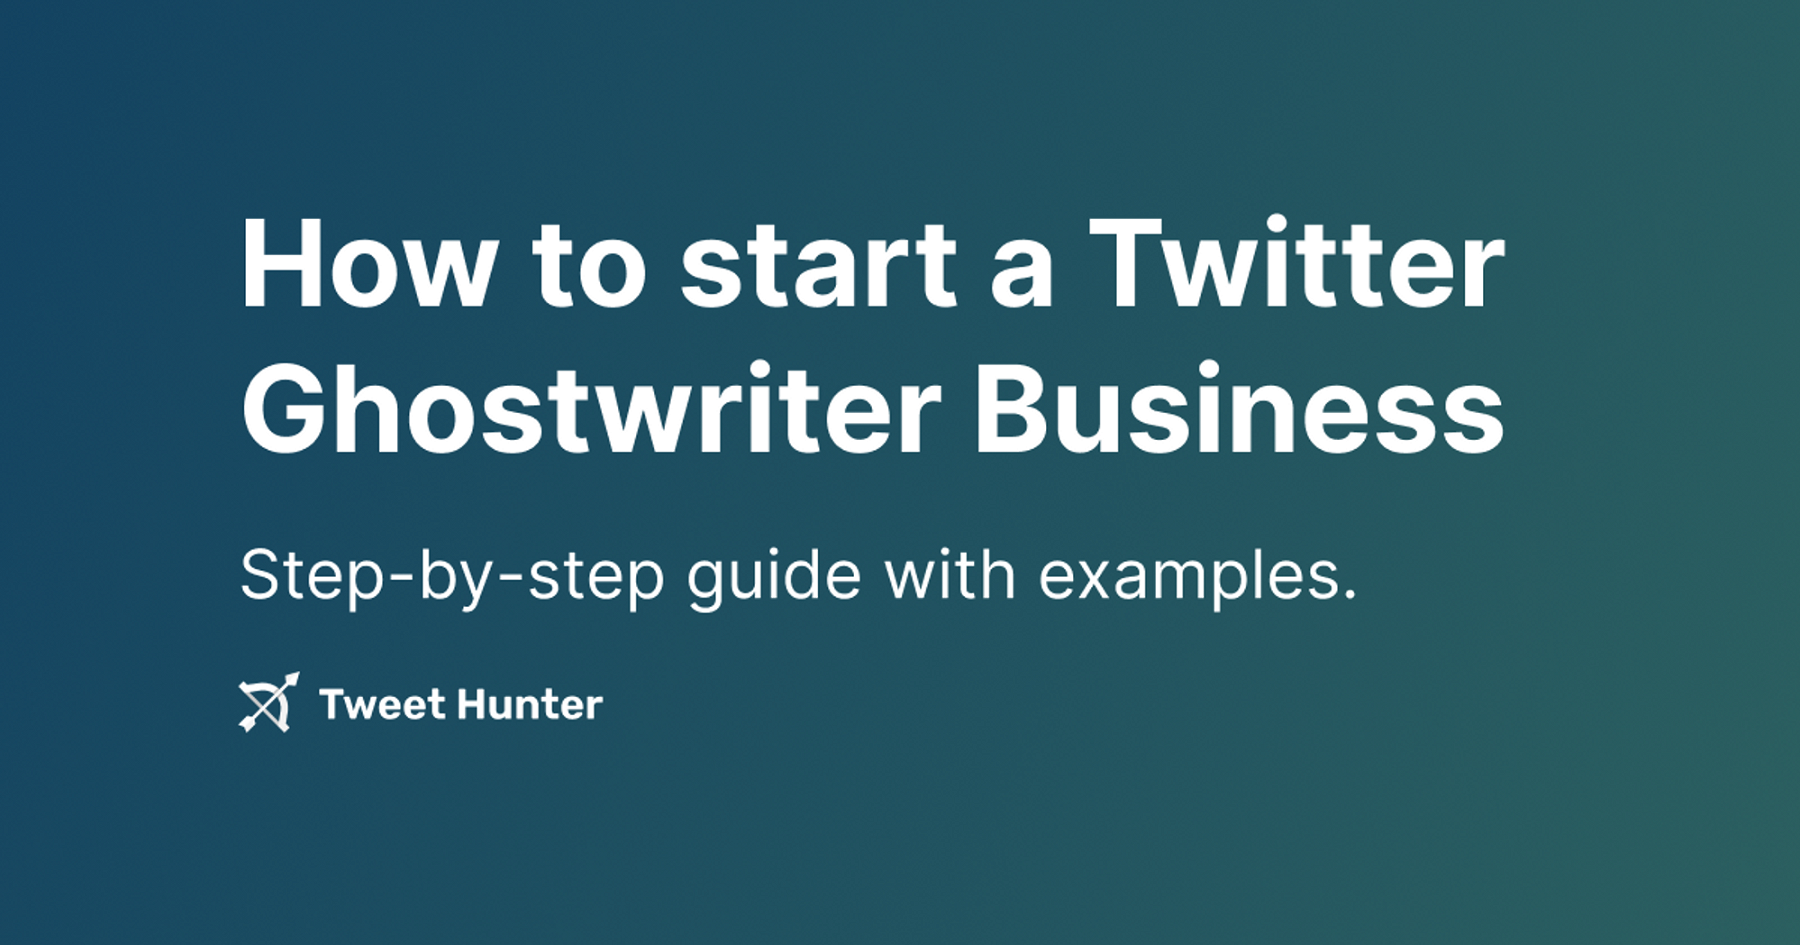 How to Start a Twitter Ghostwriter Business